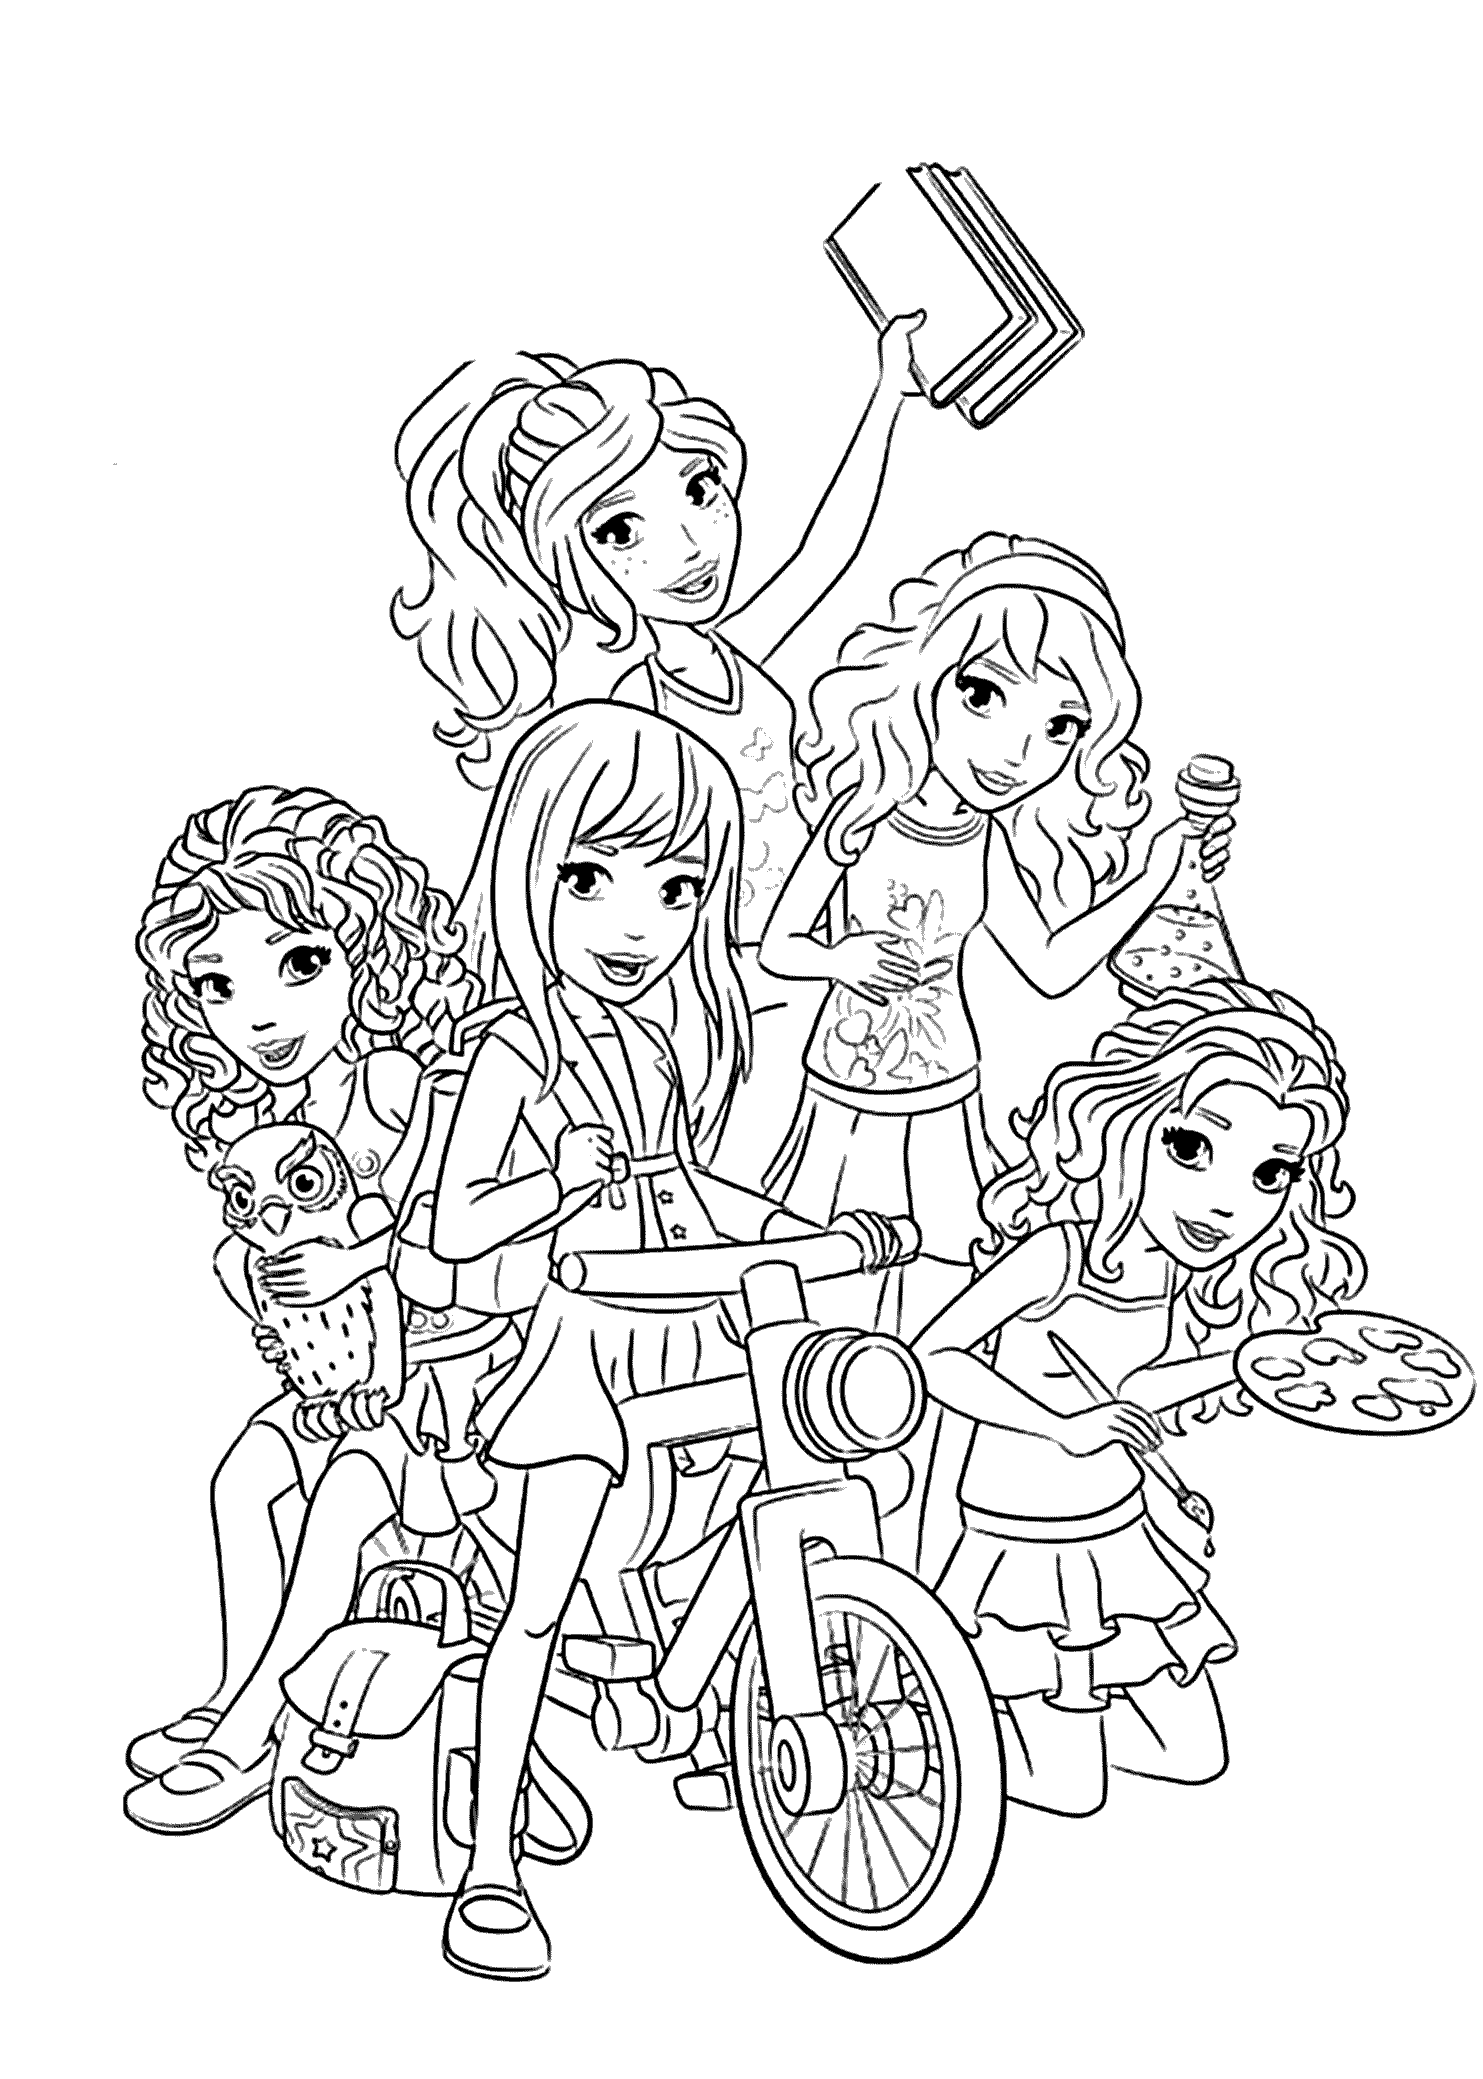 Lego Friends All Coloring Page For Kids Printable Free Lego Friends Lego Coloring Pag